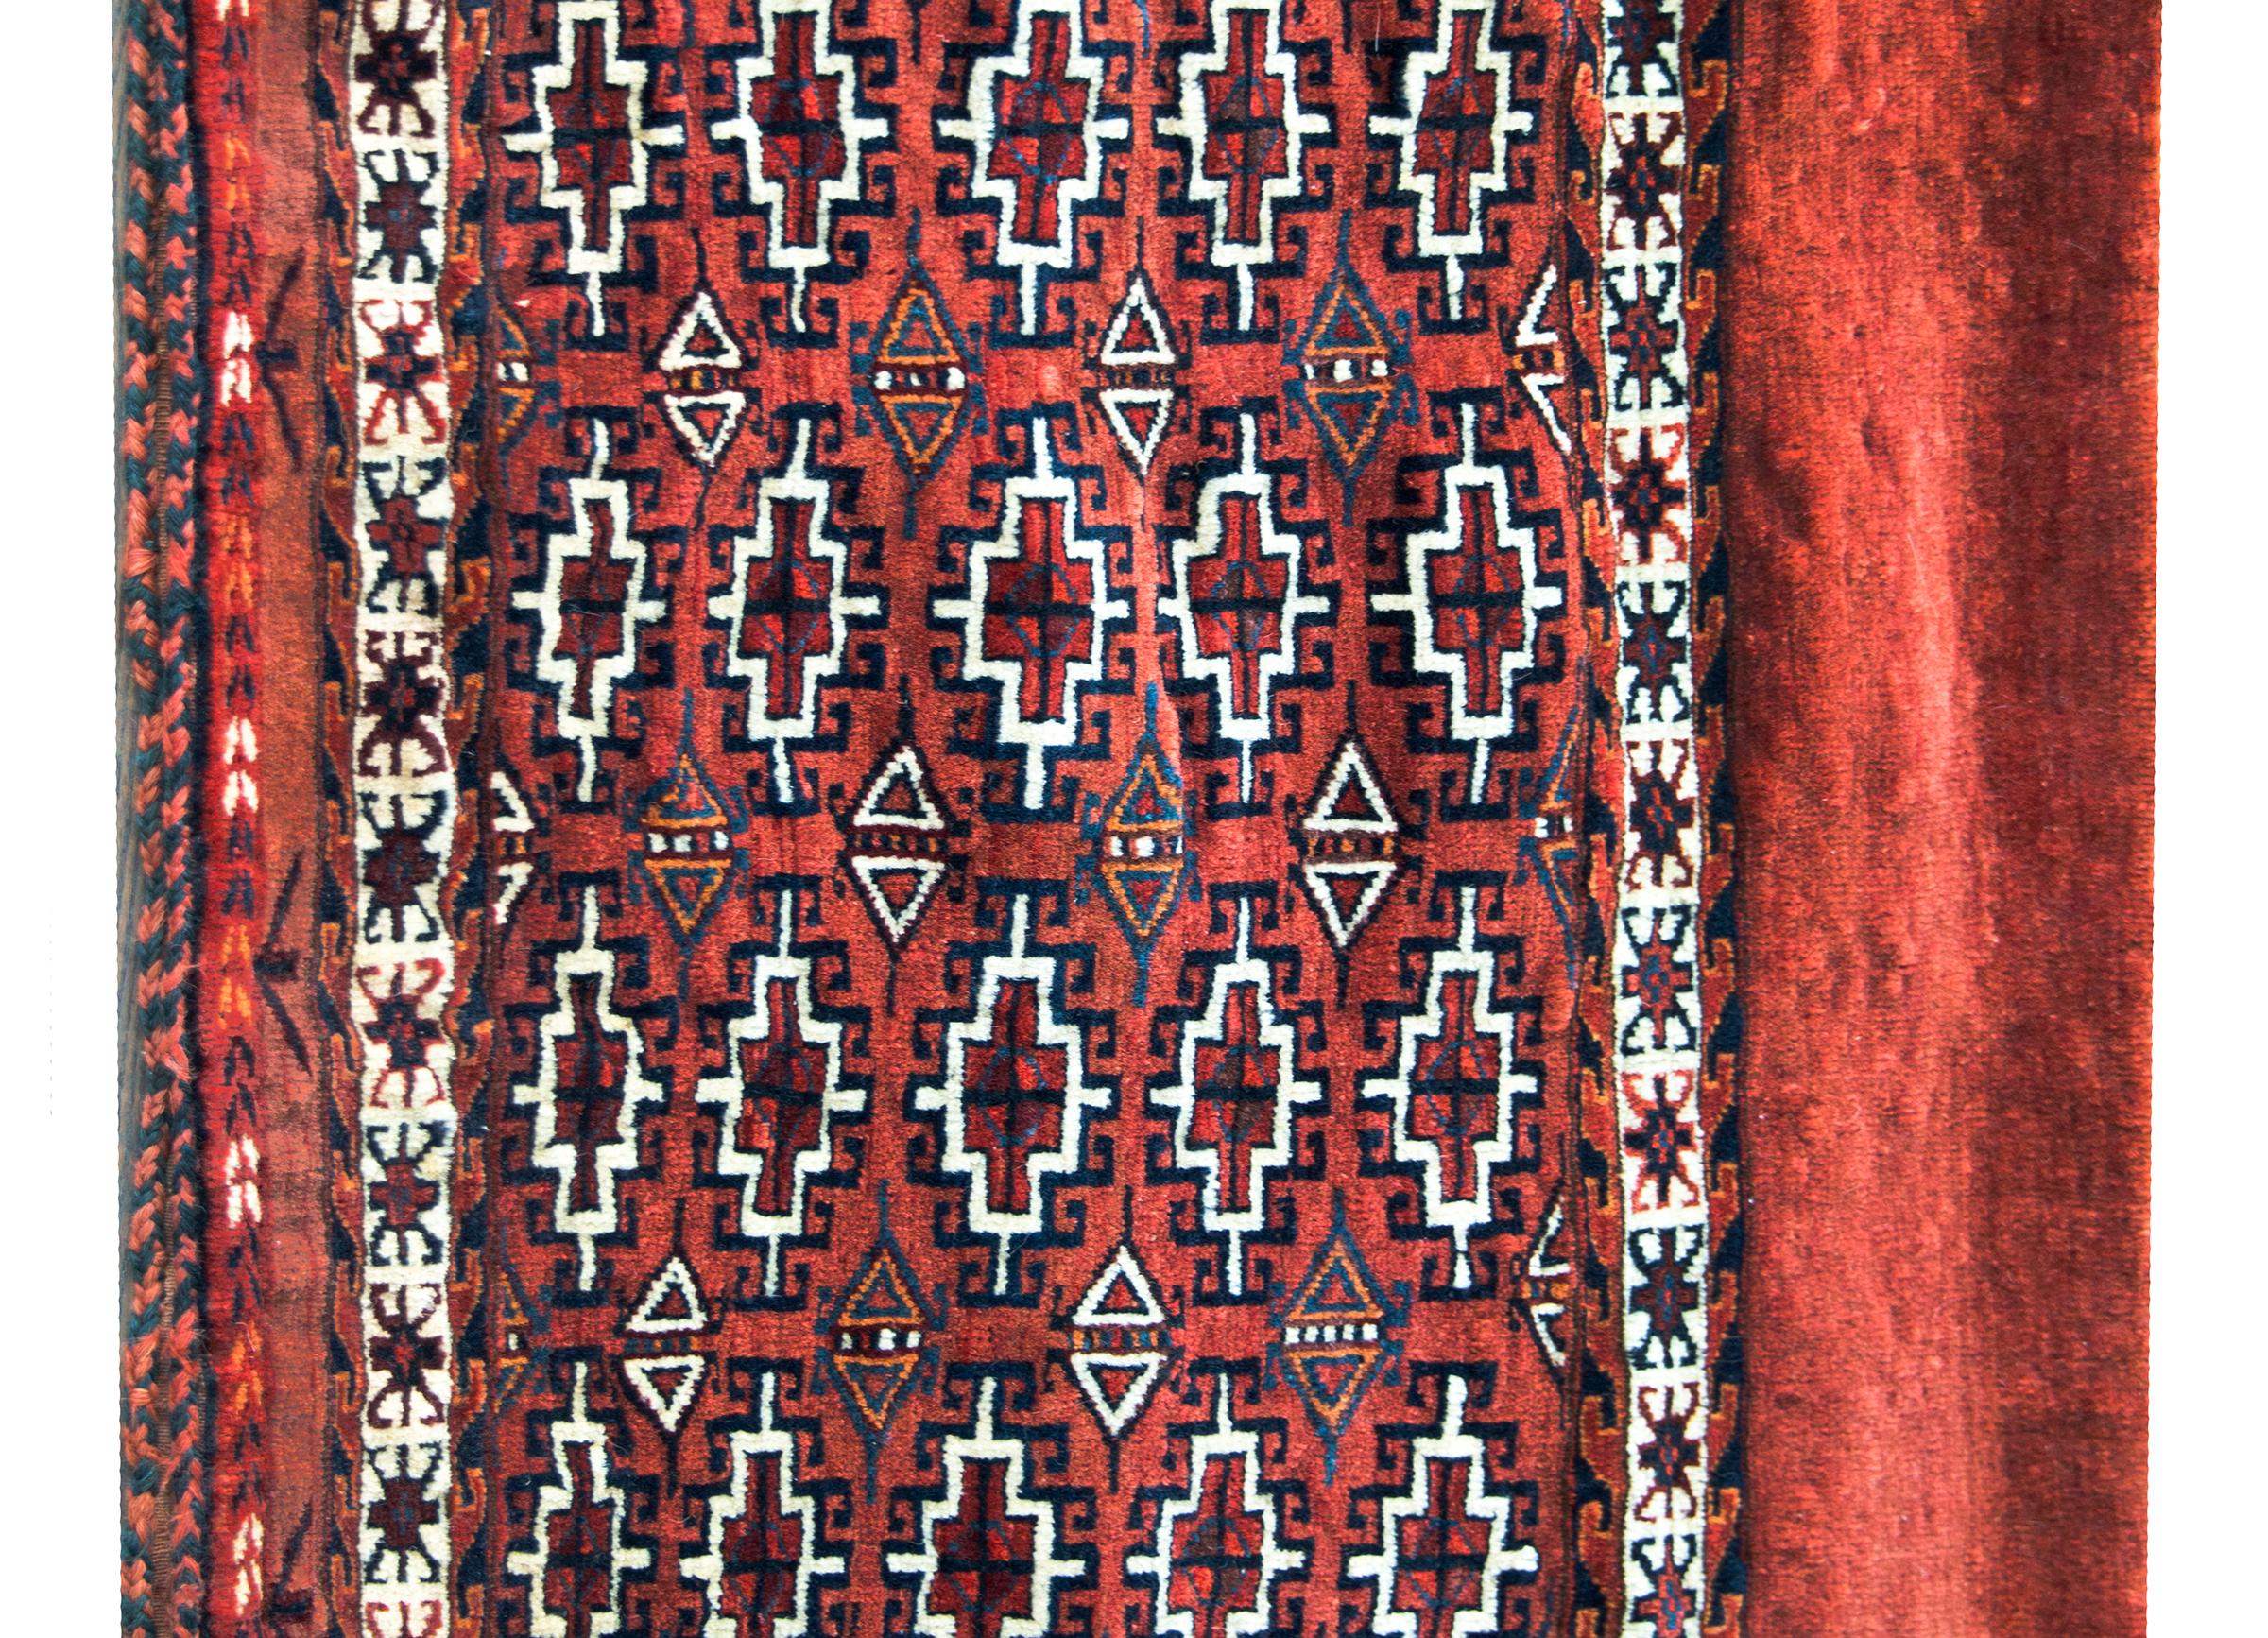 A charming early 20th century Persian Yamut bag face rug with an all-over pattern with diamonds and stylized flowers woven in light and dark indigo, orange, and crimson, and surrounded by a border of multiple thin stylized geometric patterned